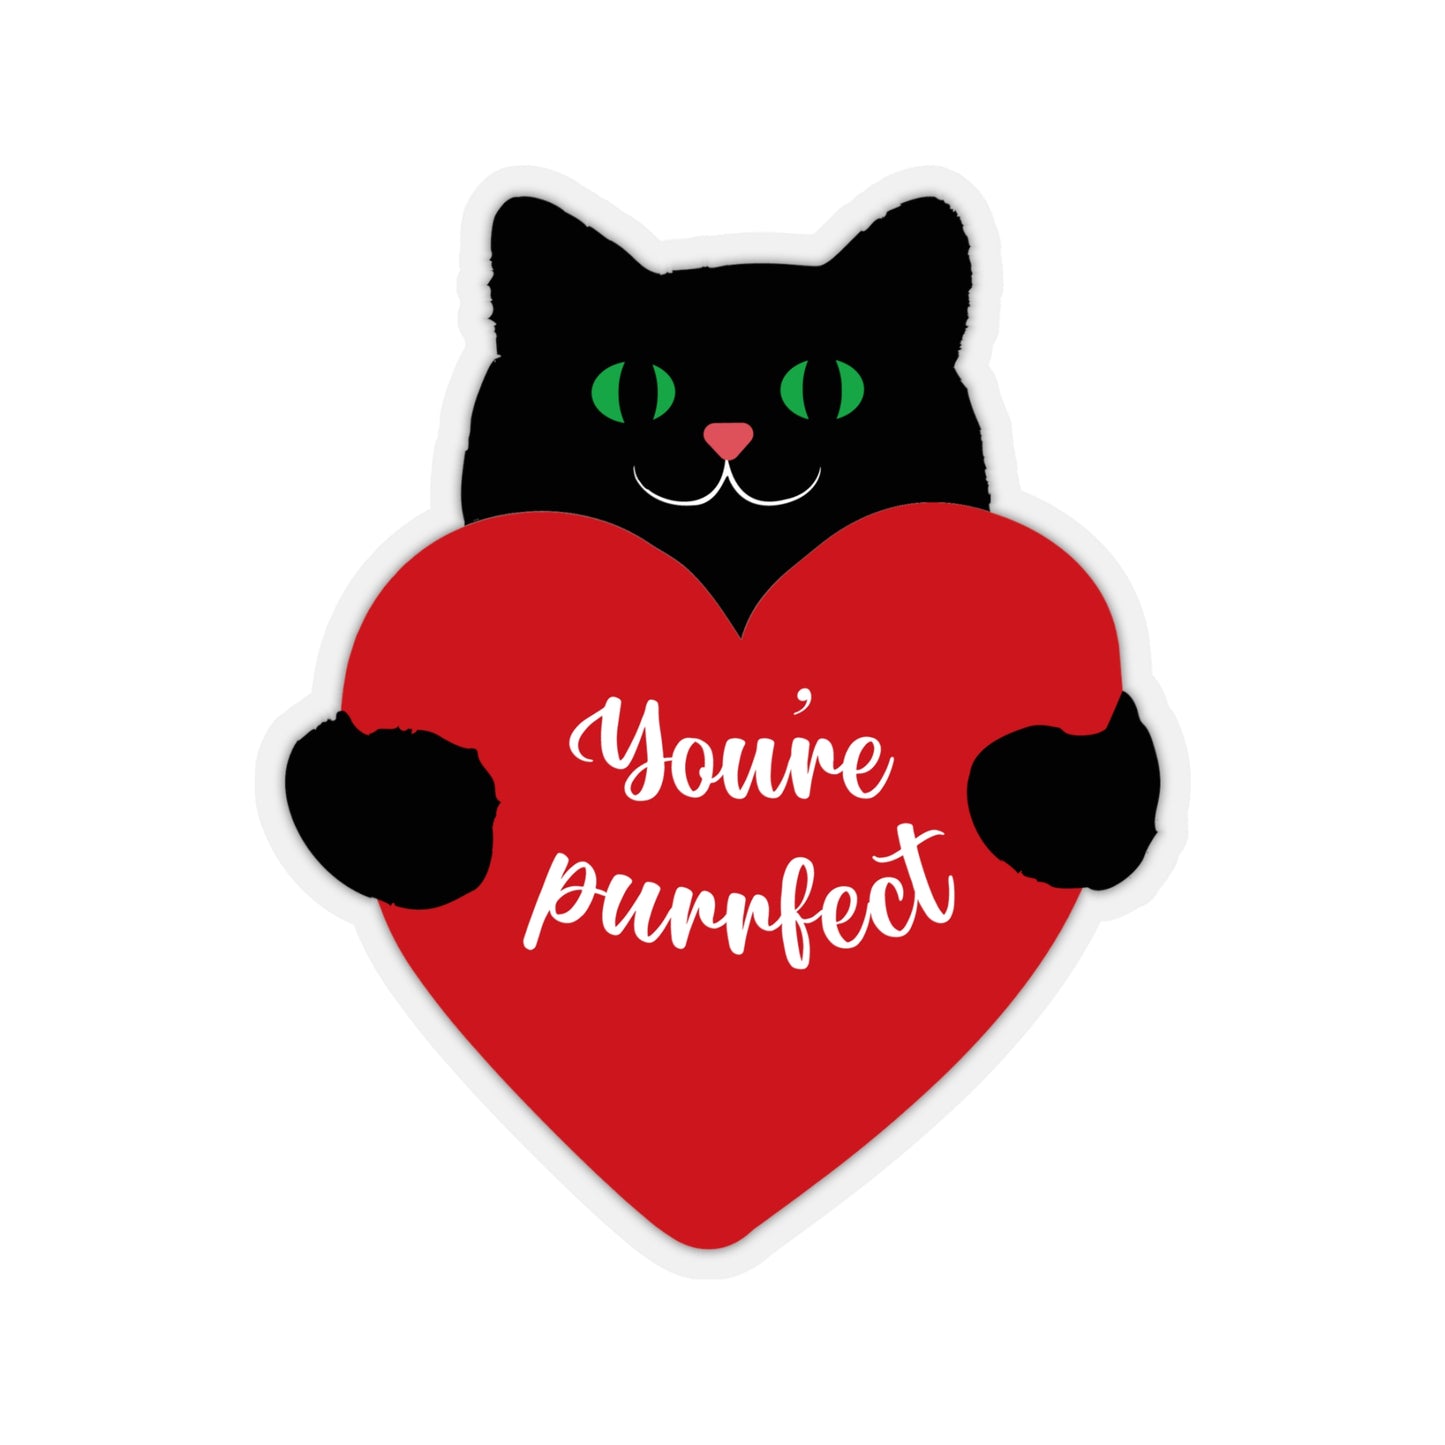 Lovely Kiss-Cut Stickers Valentines Day Black Cat With A Heart Decorative Stickers for cards, Scrapbooks, gift tags, or on their own